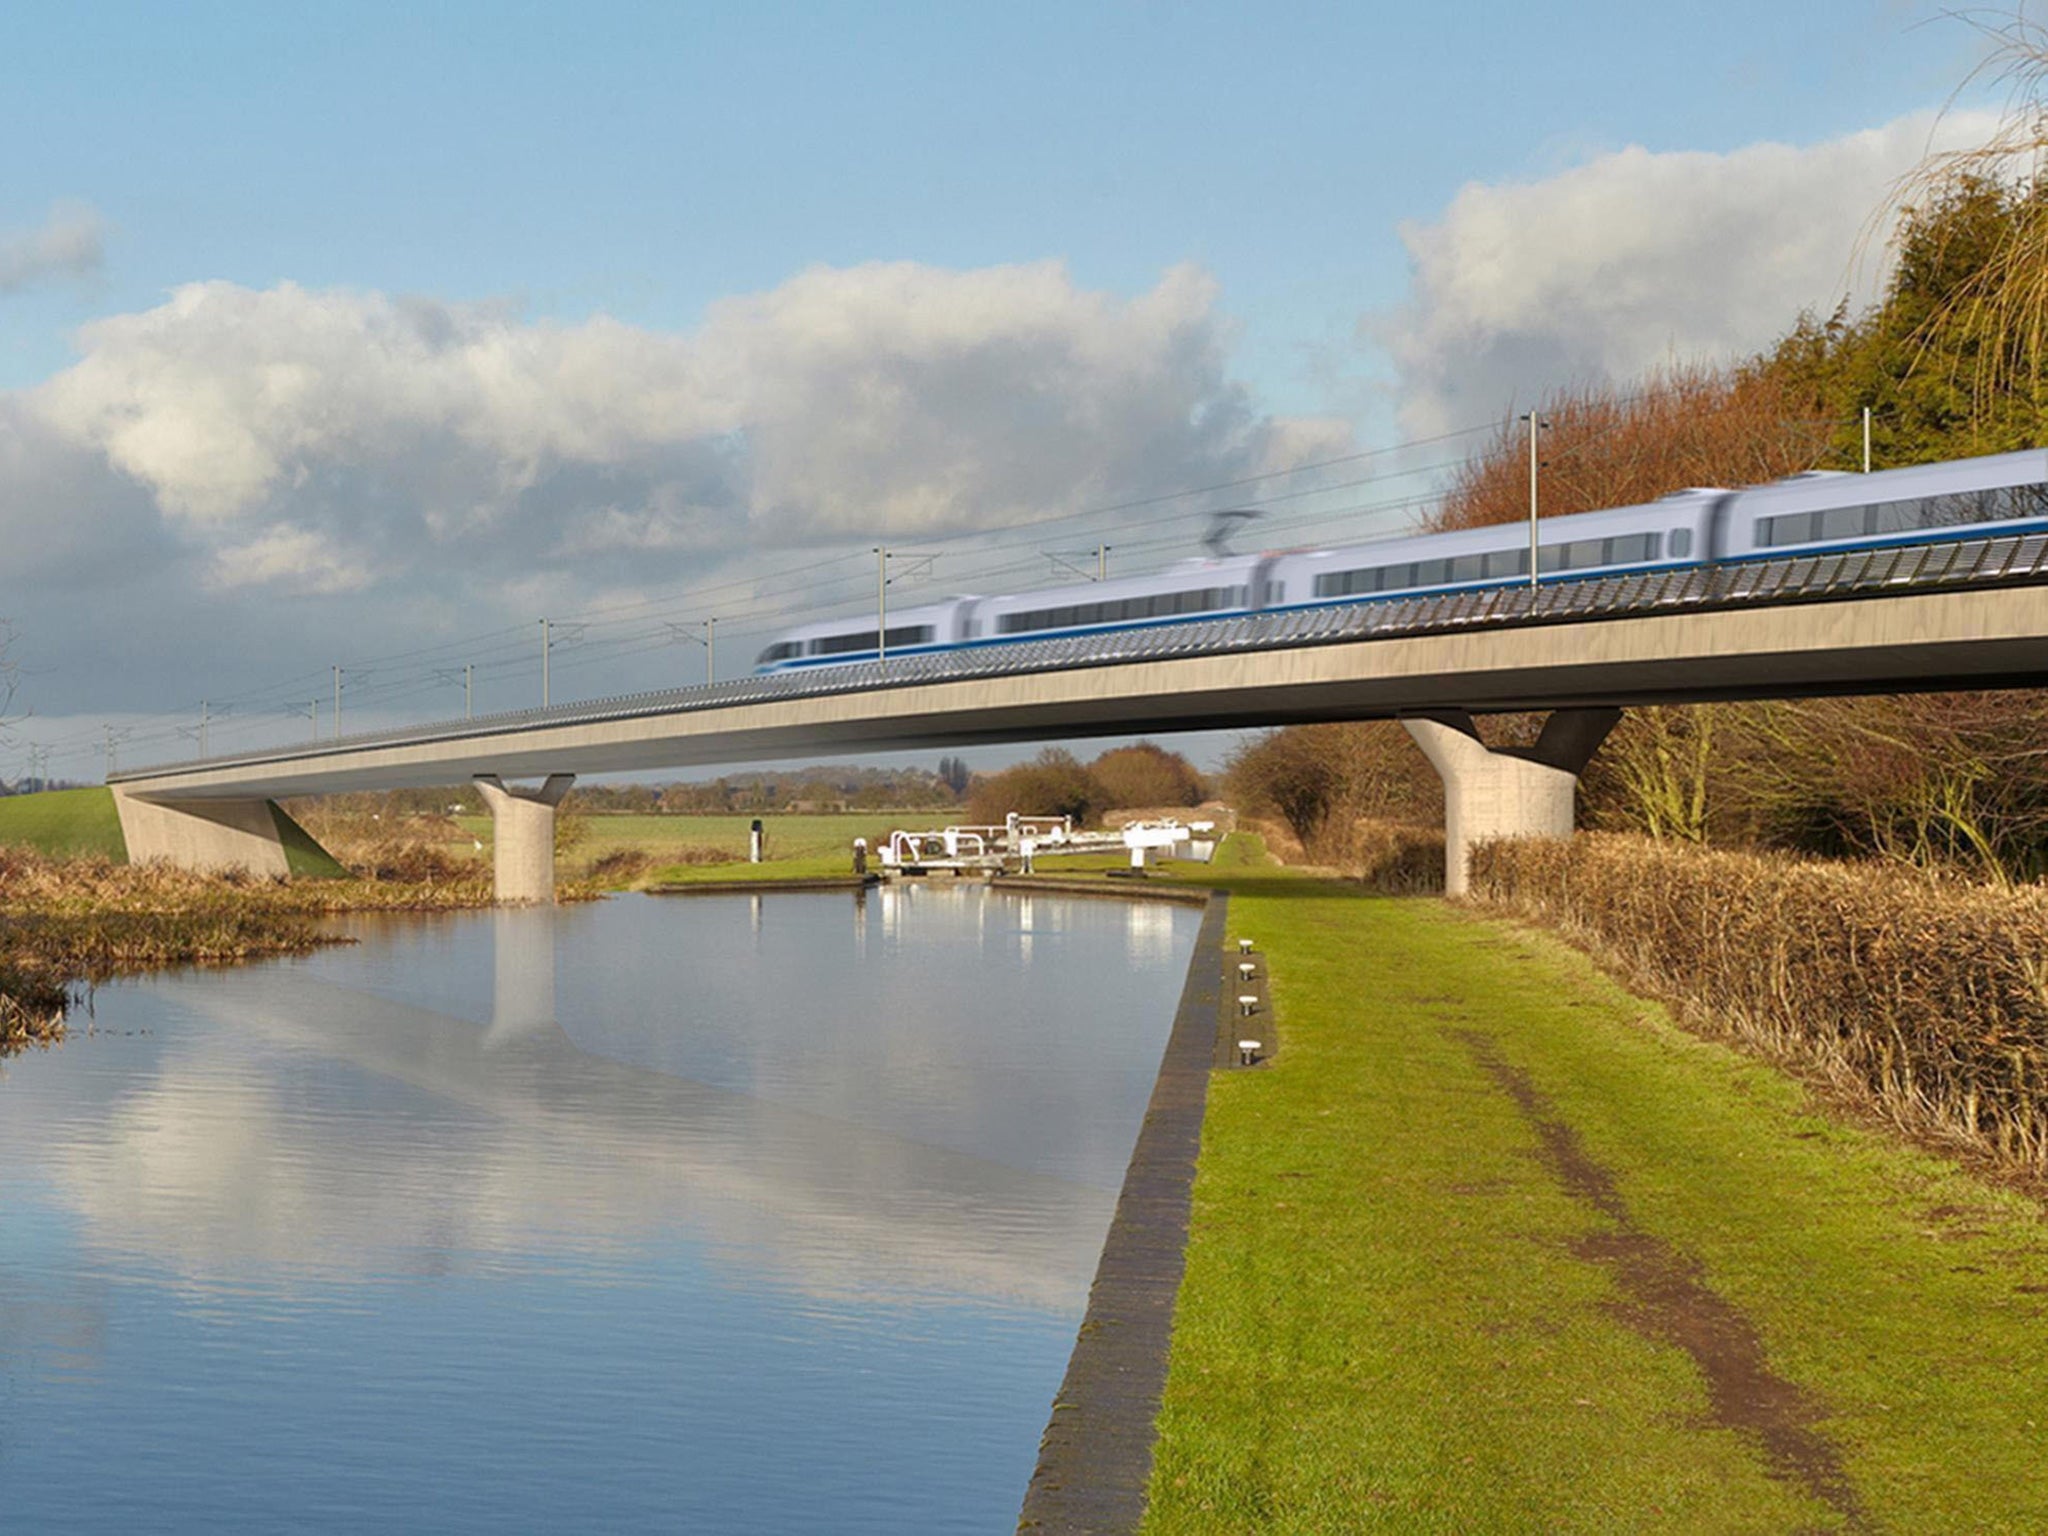 An artist's impression of how the Birmingham and Fazeley viaduct would look, part of the proposed route for the HS2 high speed rail scheme